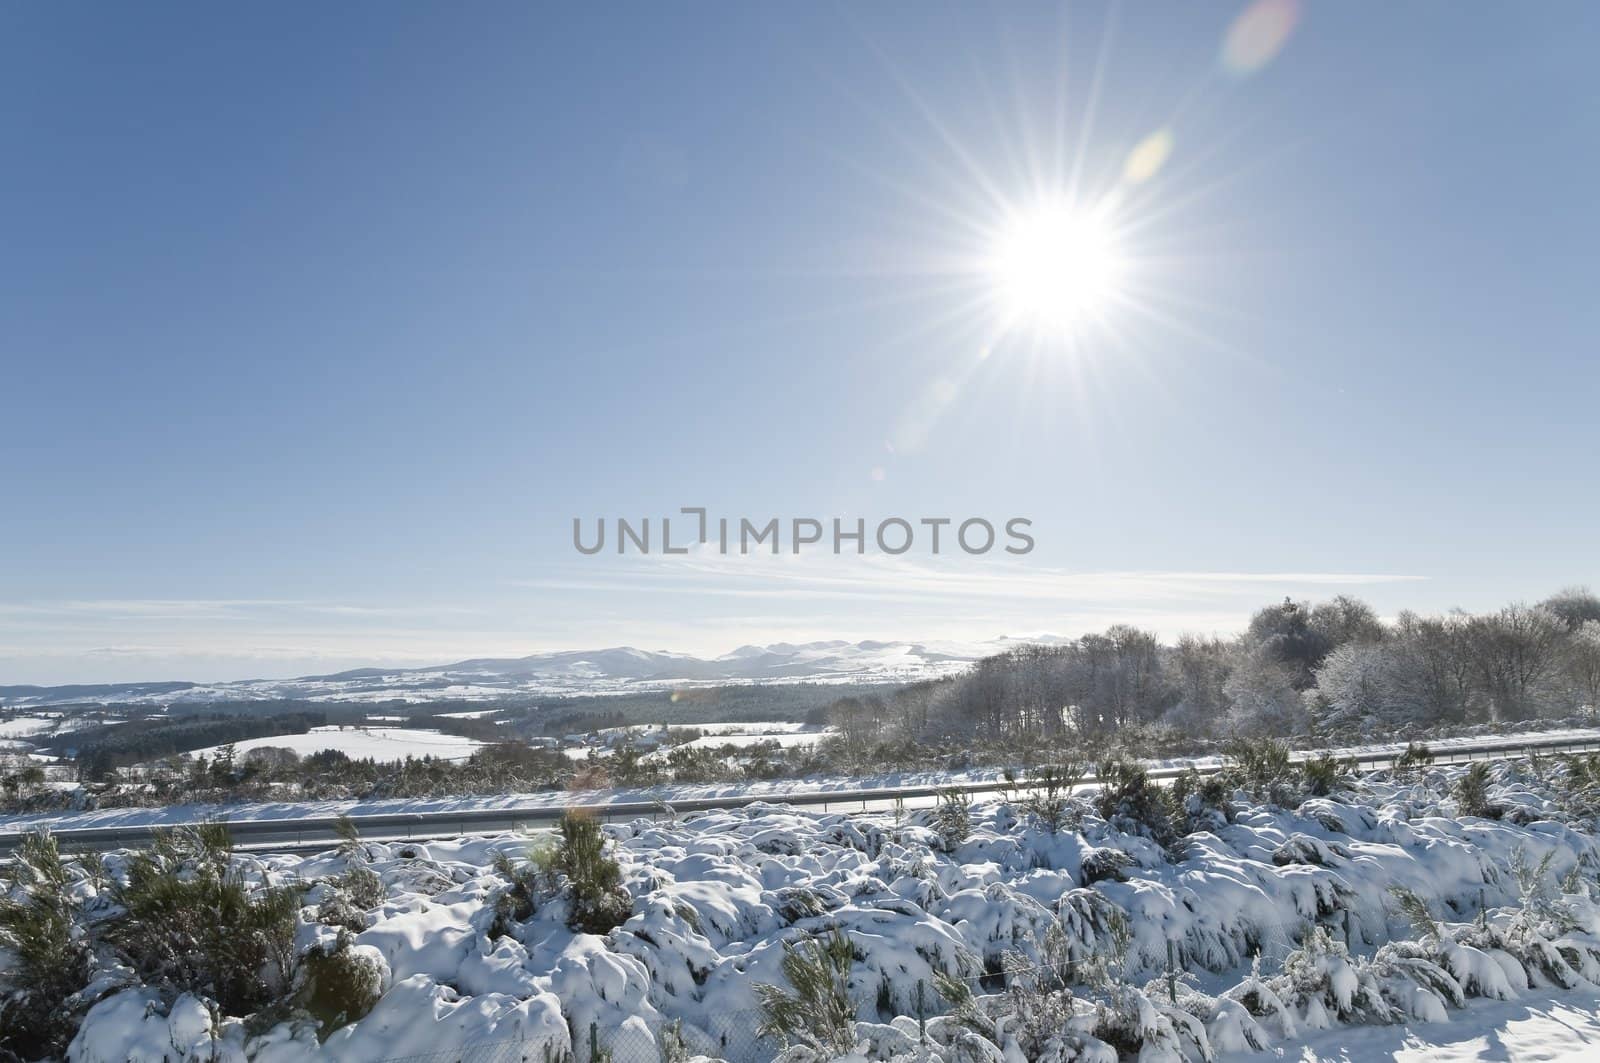 Winter landscape with a blue sky and lot of snow and also with a motorway